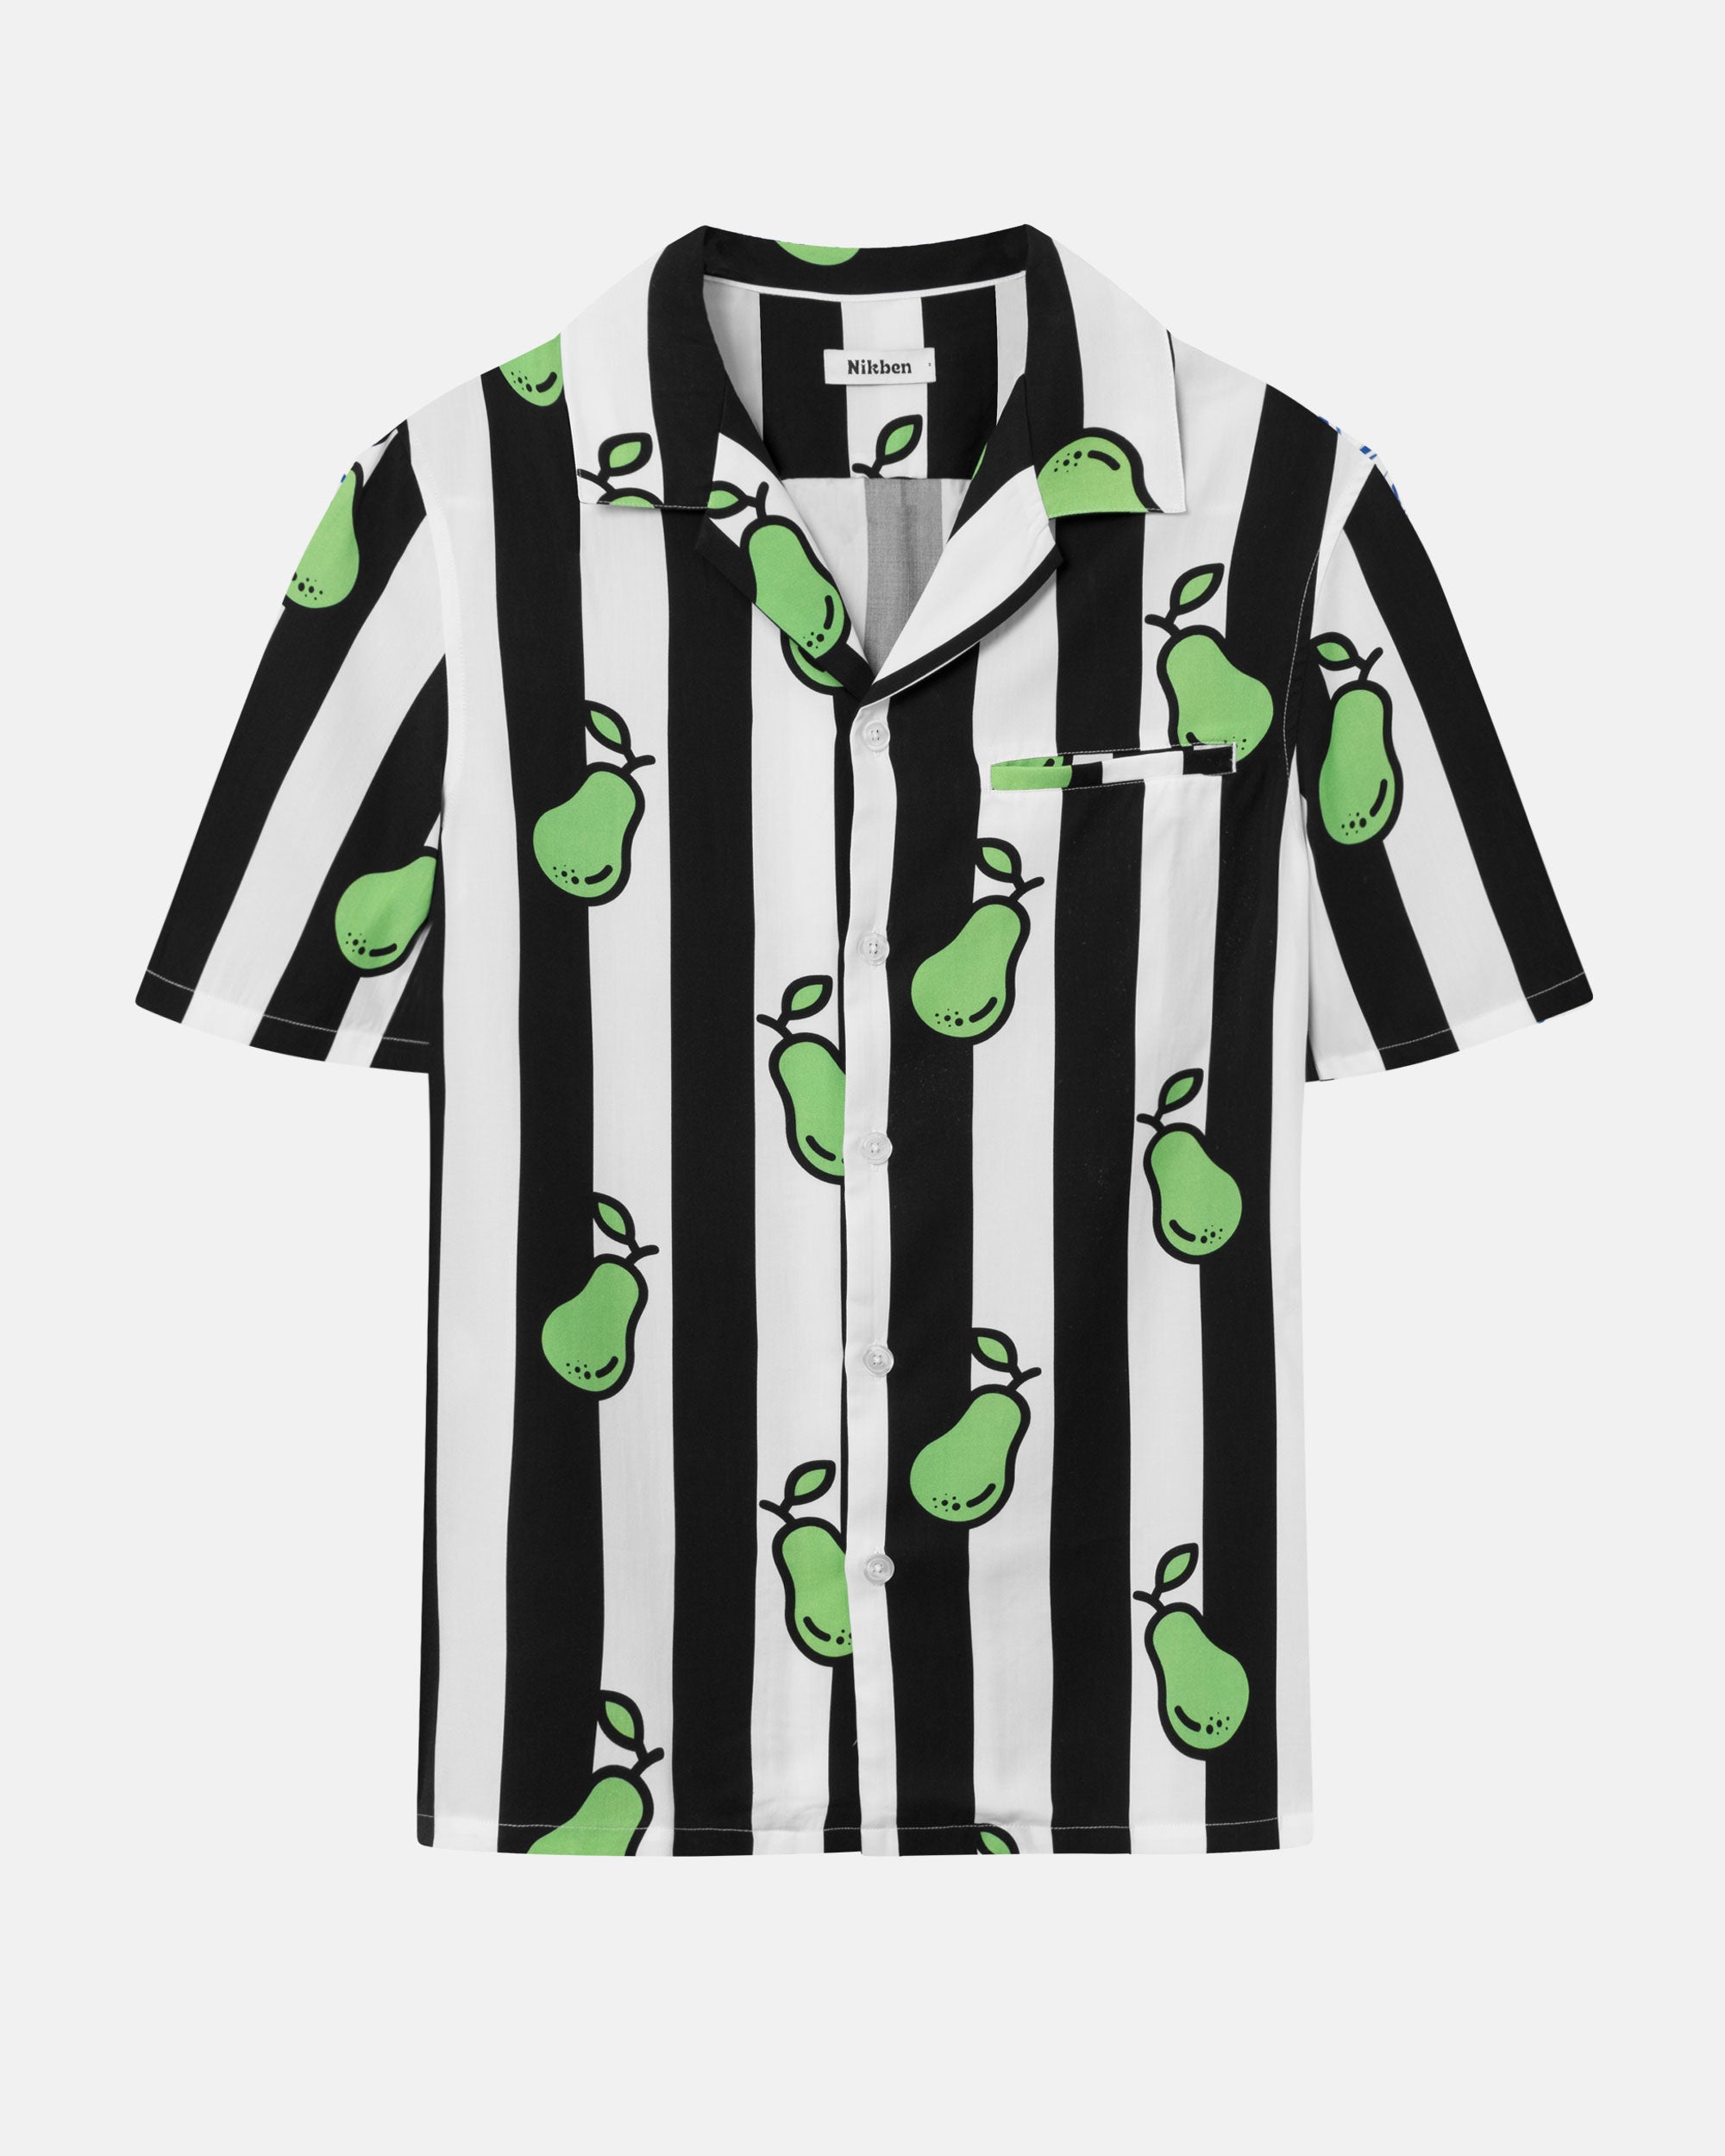 Black and white short-sleeved vacation shirt with green pear illustrations, open collar, one breast pocket, and button closure.